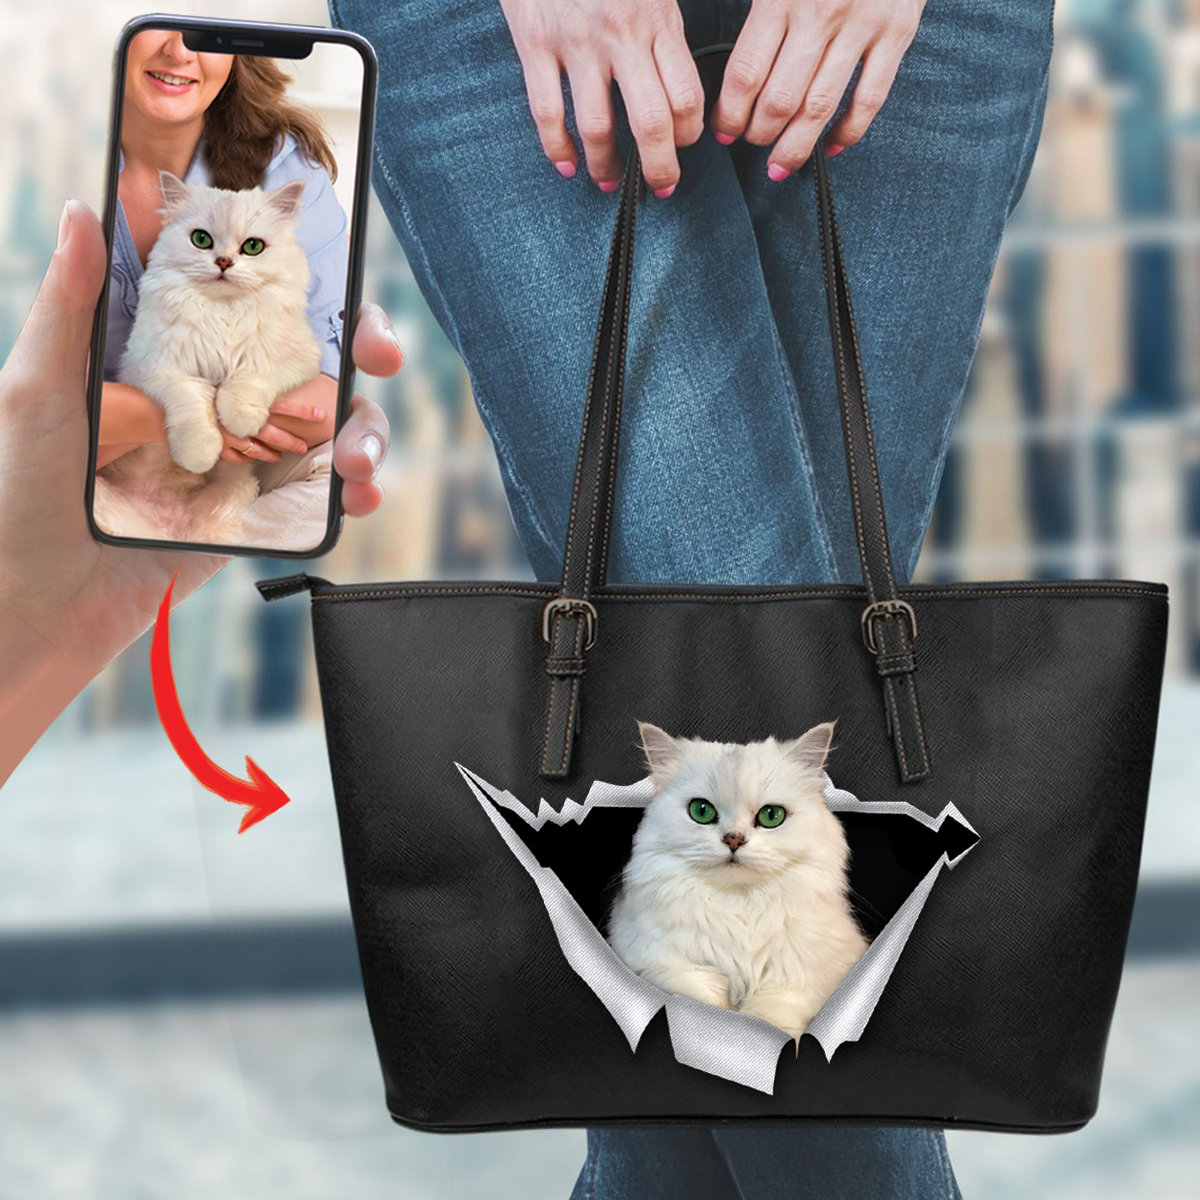 Go Out Together - Personalized Tote Bag With Your Pet's Photo V2-K